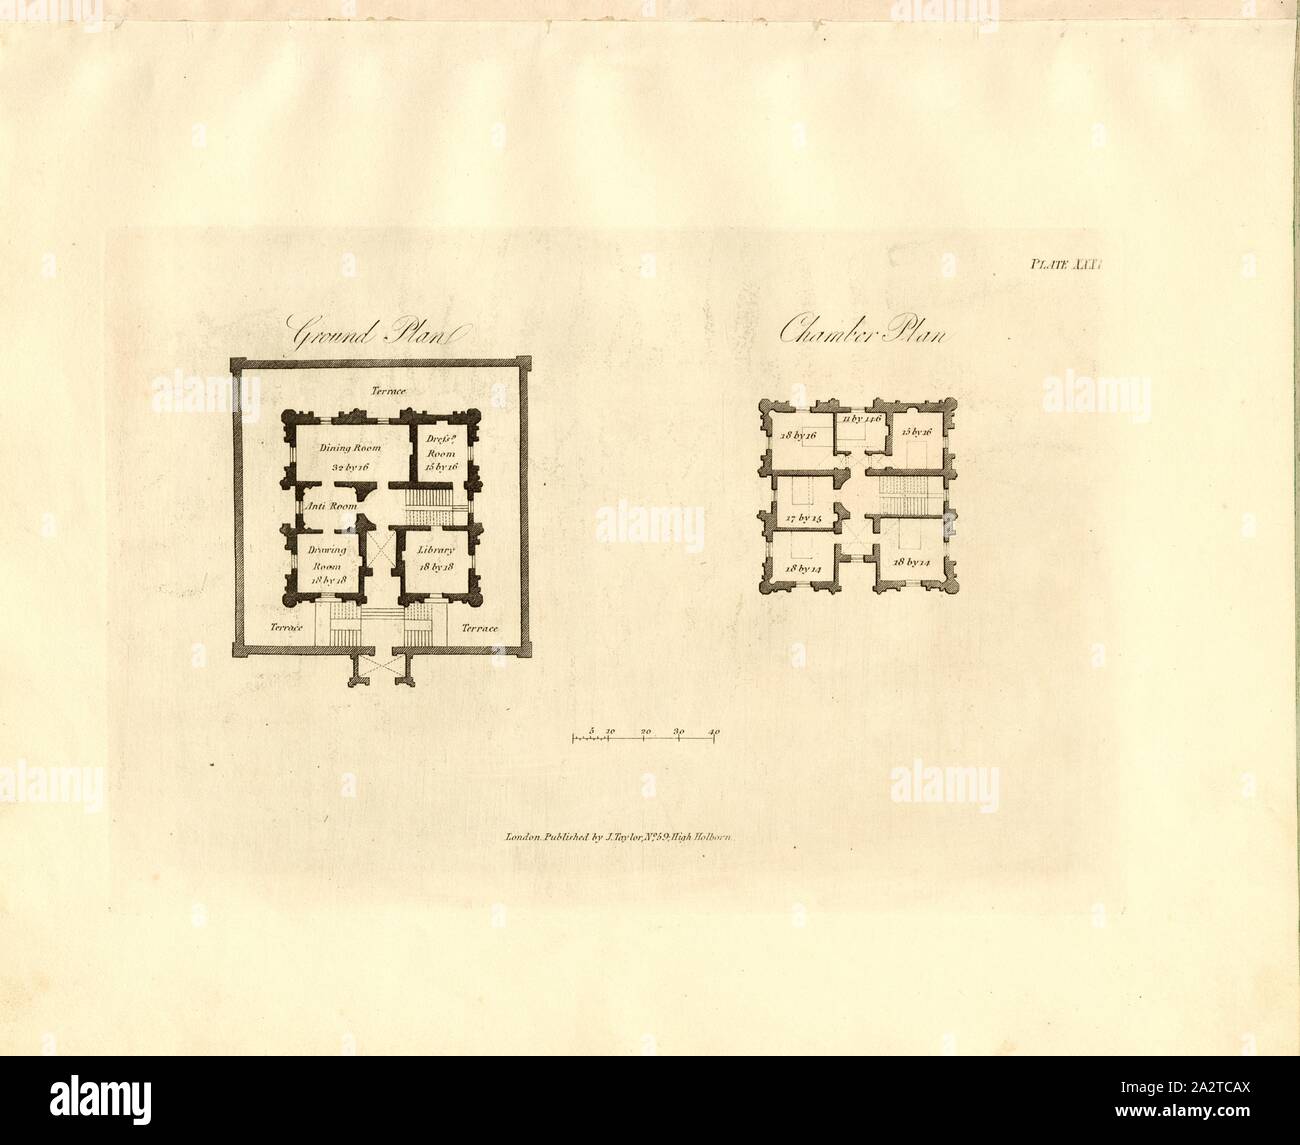 Villa in the Eastern style 1, Floor plans of a villa in the Indian style, Pl. XXXI, to p. 31, Robert Lugar: Architectural sketches for cottages, rural dwellings, and villas, in the Grecian, Gothic, and fancy styles: with plans; suitable to persons of genteel life and moderate fortune.: preceded by some observations on scenery and character proper for picturesque buildings. London: printed for J. Taylor, at the Architectural Library, 1823 Stock Photo